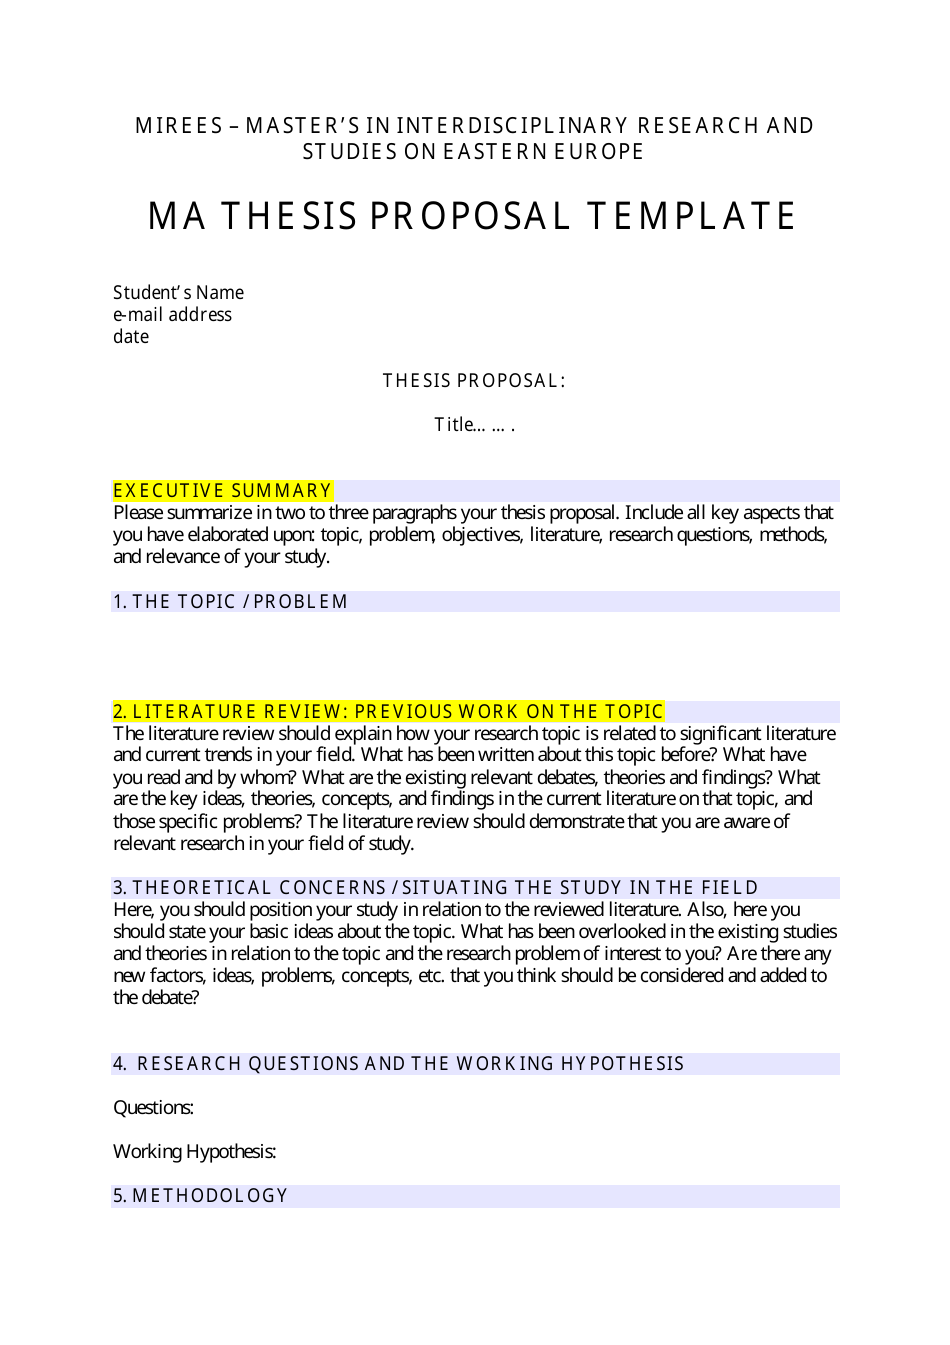 Ma Thesis Proposal Template - Interdisciplinary Research and Regarding Technical Proposal Template